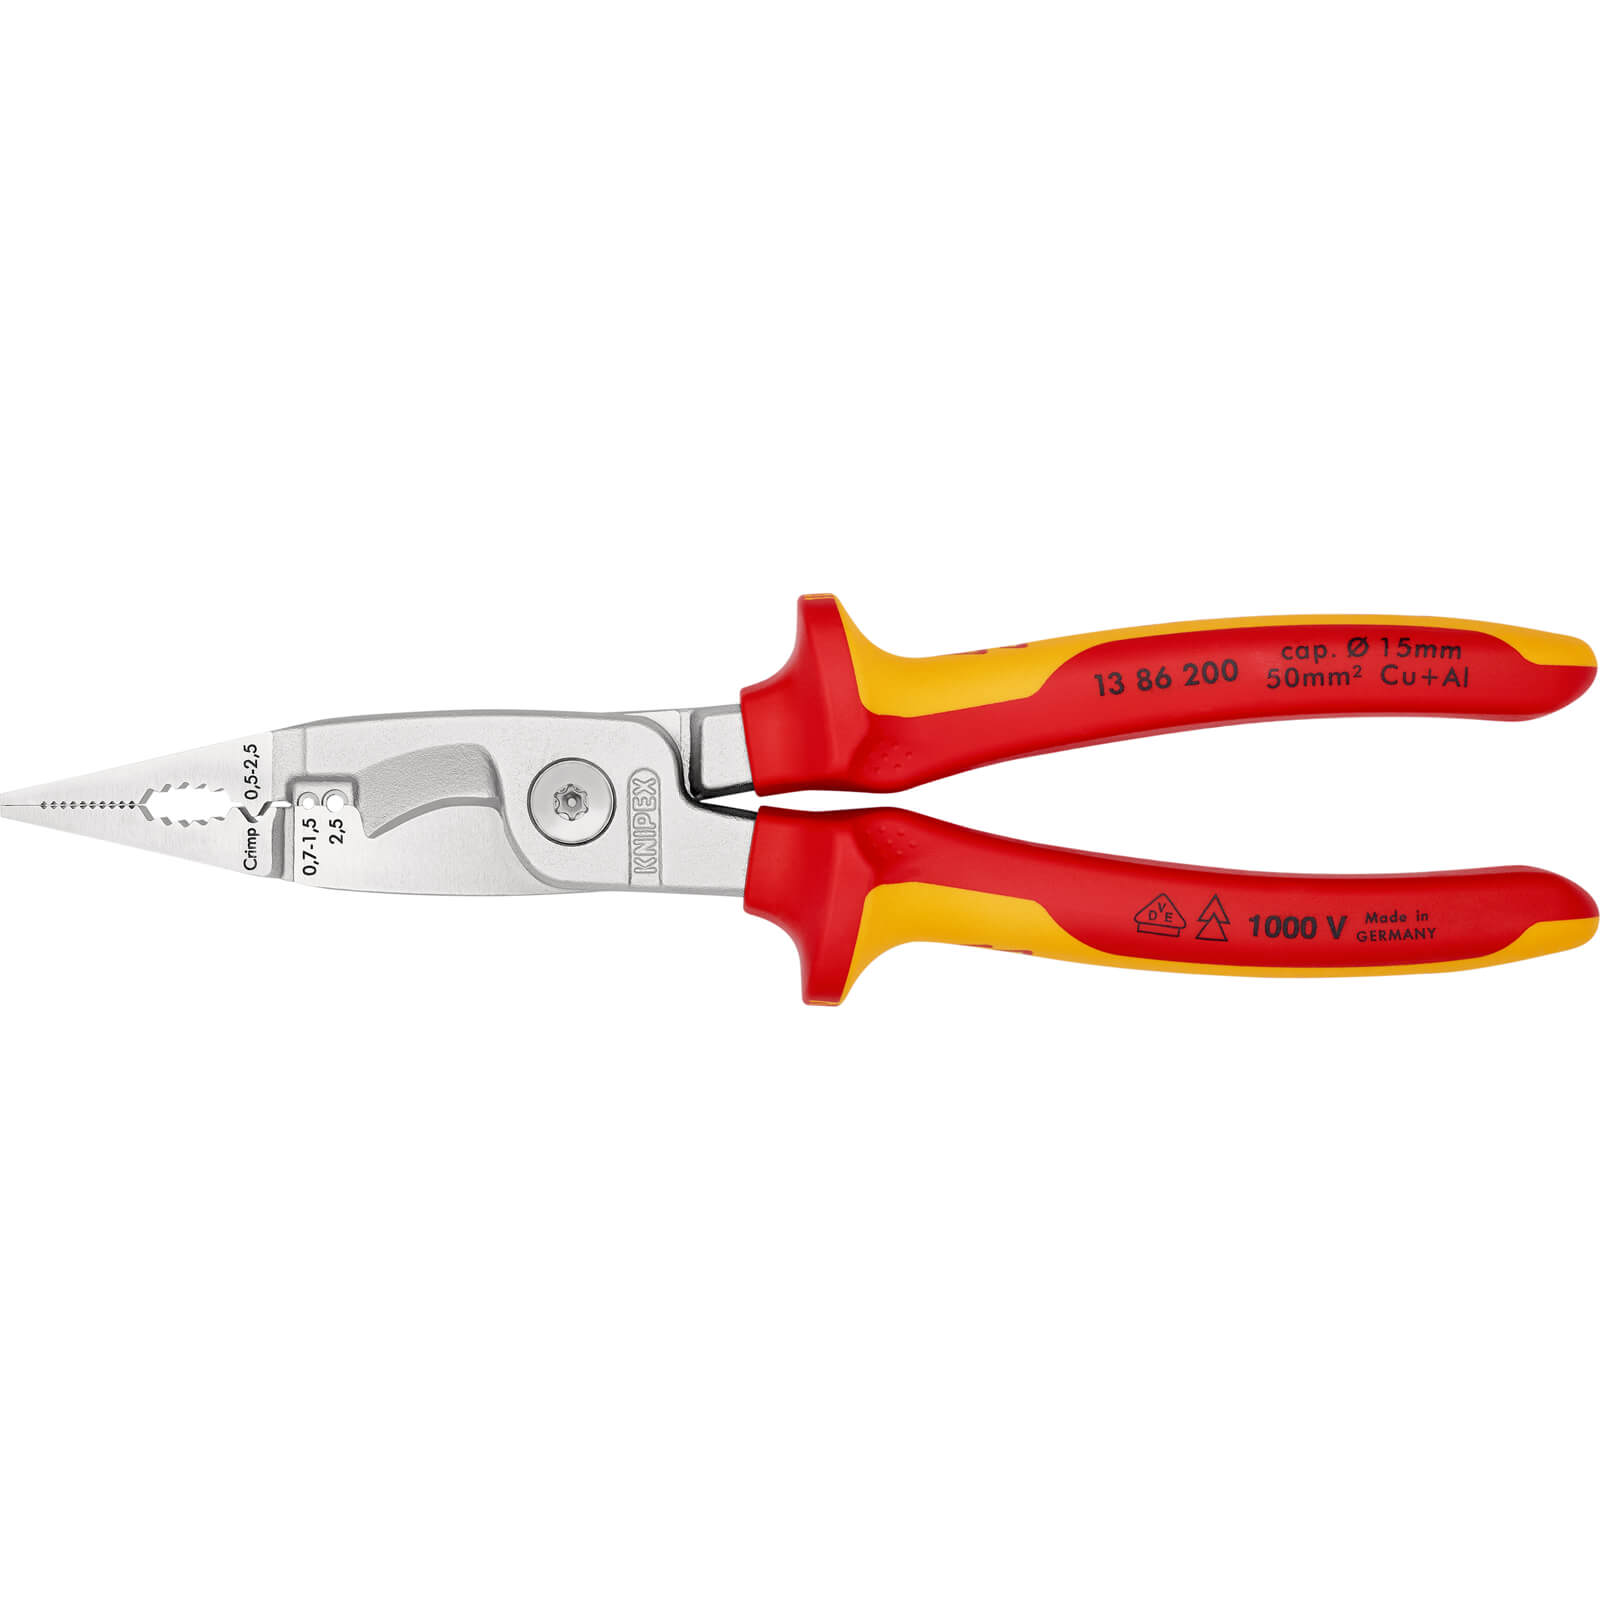 Photo of Knipex 13 86 Vde Insulated Electrical Installation Pliers 200mm